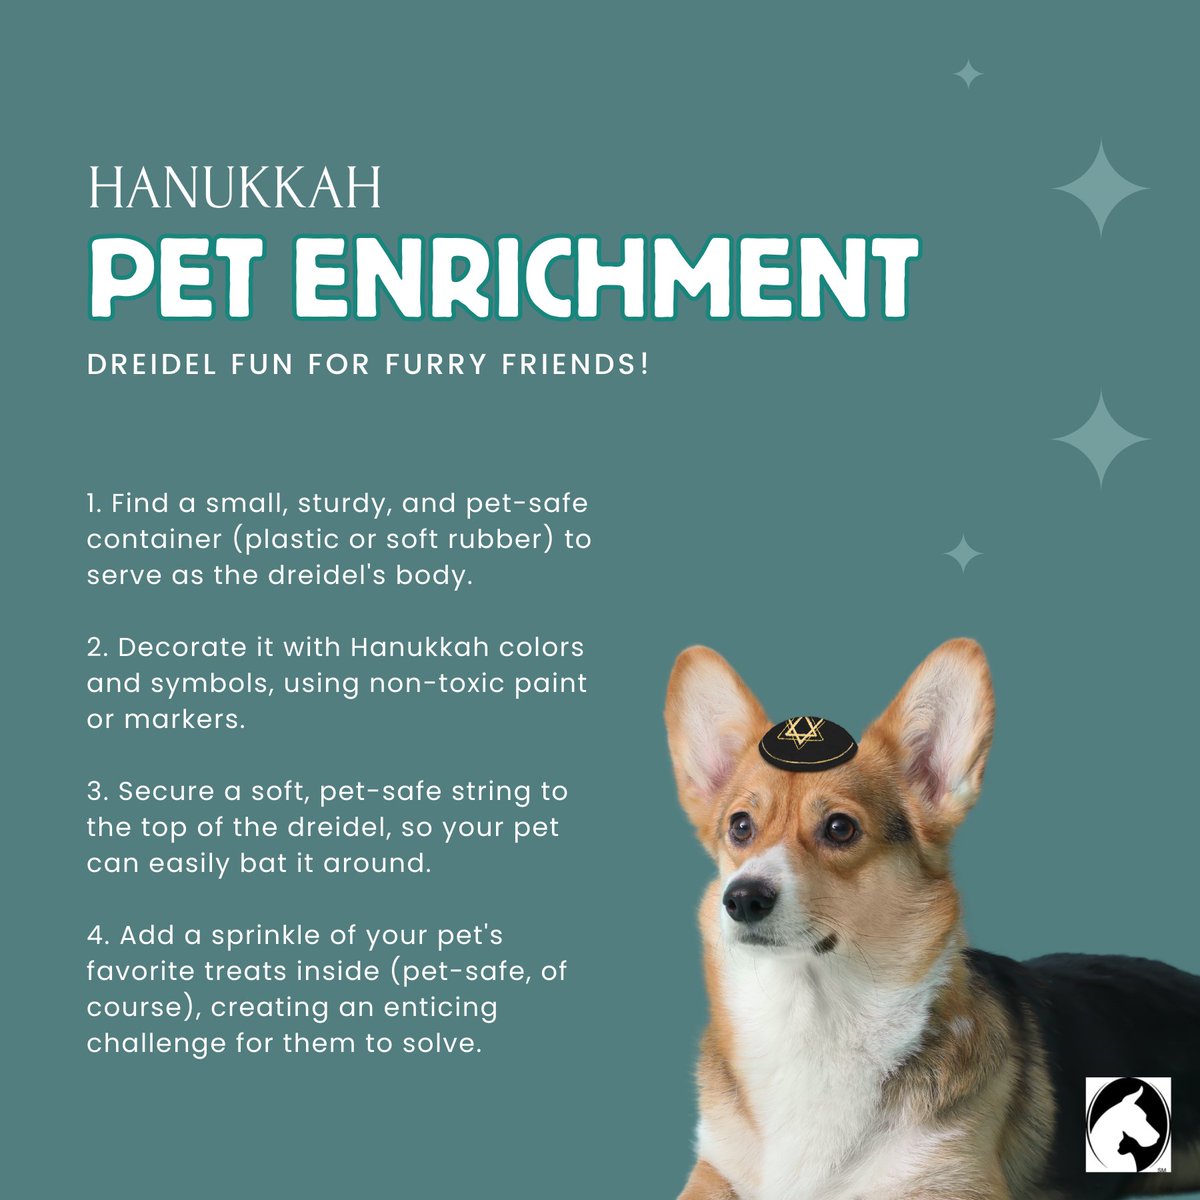 Happy Hanukkah! Try some Hanukkah-themed enrichment activities this holiday season. Try out this pet-safe DIY dreidel to keep them mentally engaged and happy. 🕯️🐕 #PetEnrichment